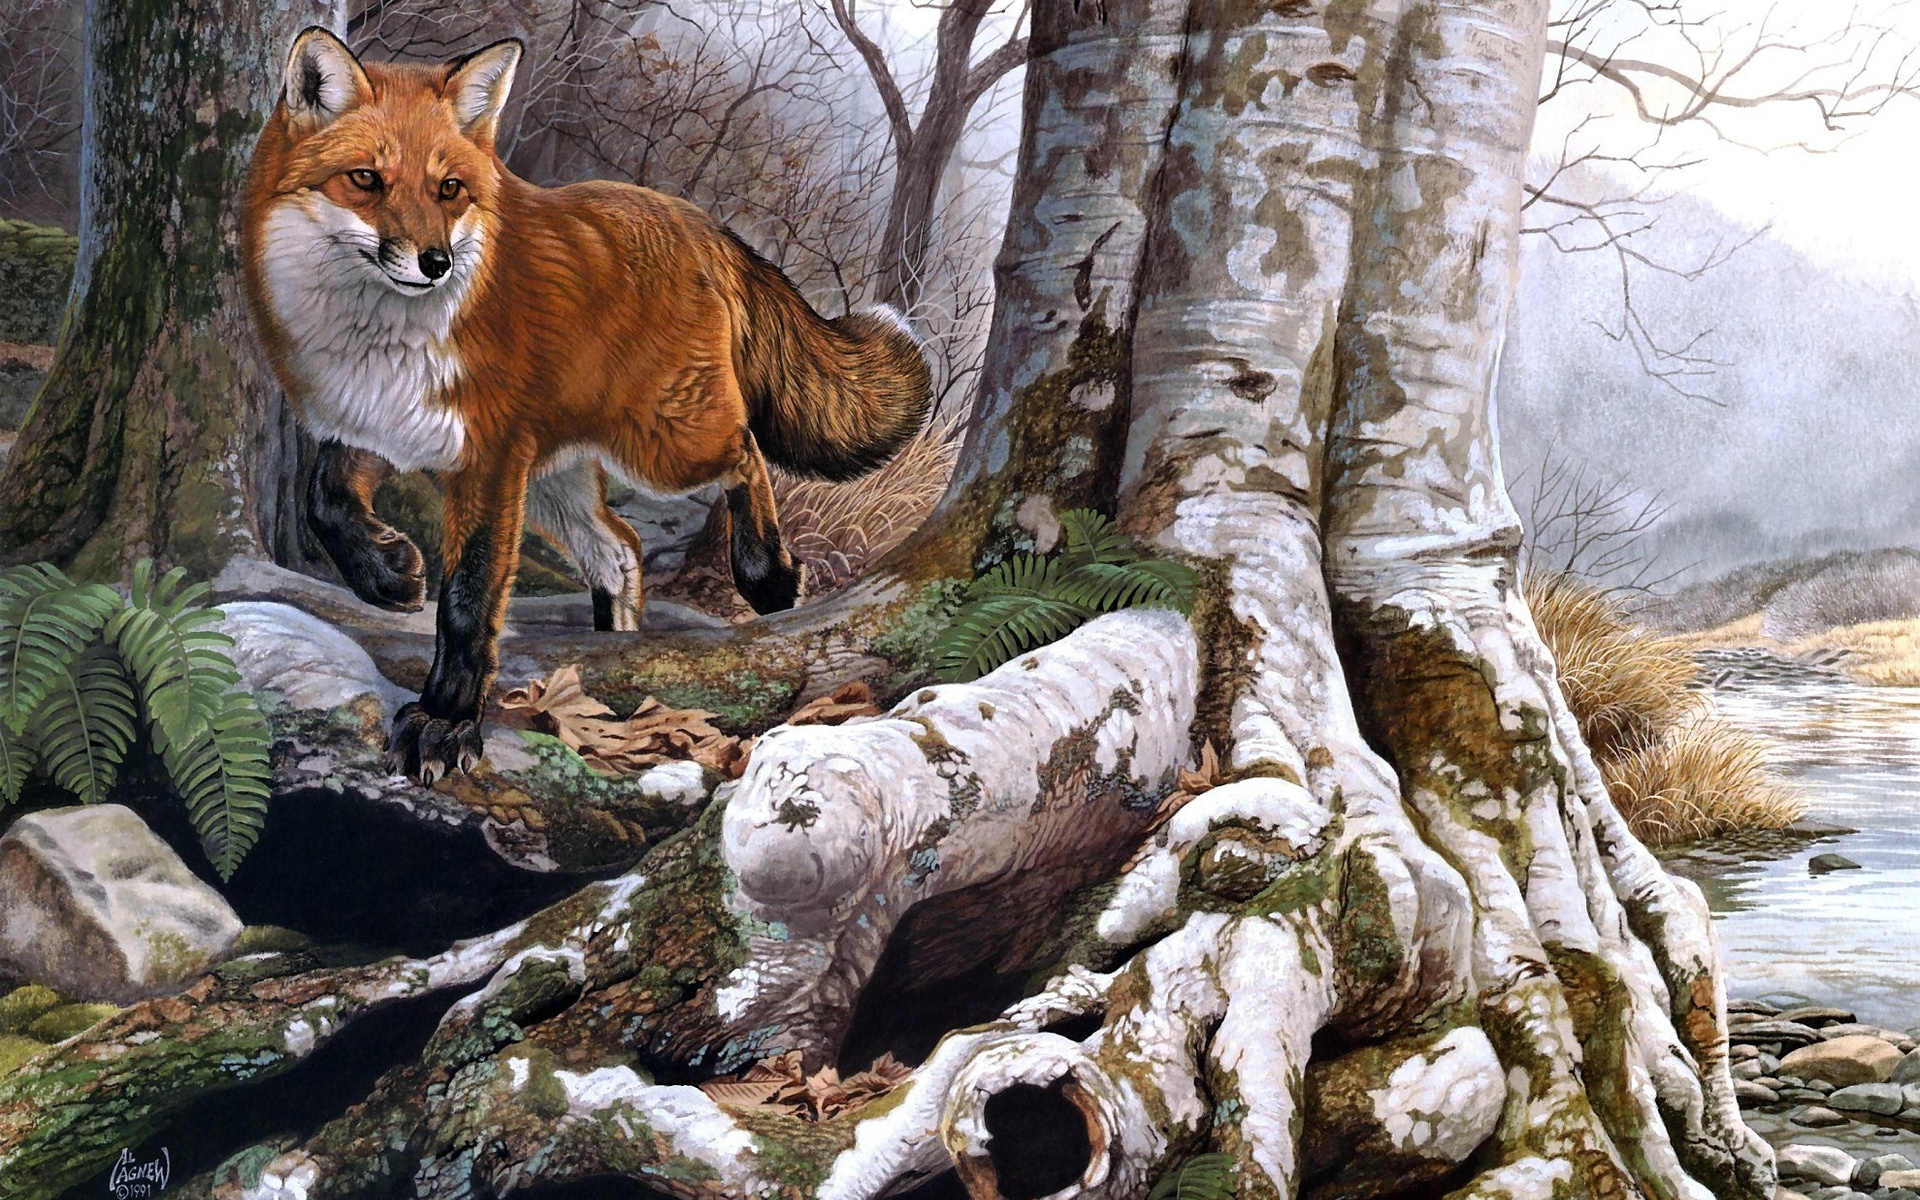 animals, Fox, Foxes, Nature, Landscapes, Trees, Forests, Rivers, Paintings, Artistic, Art Wallpaper